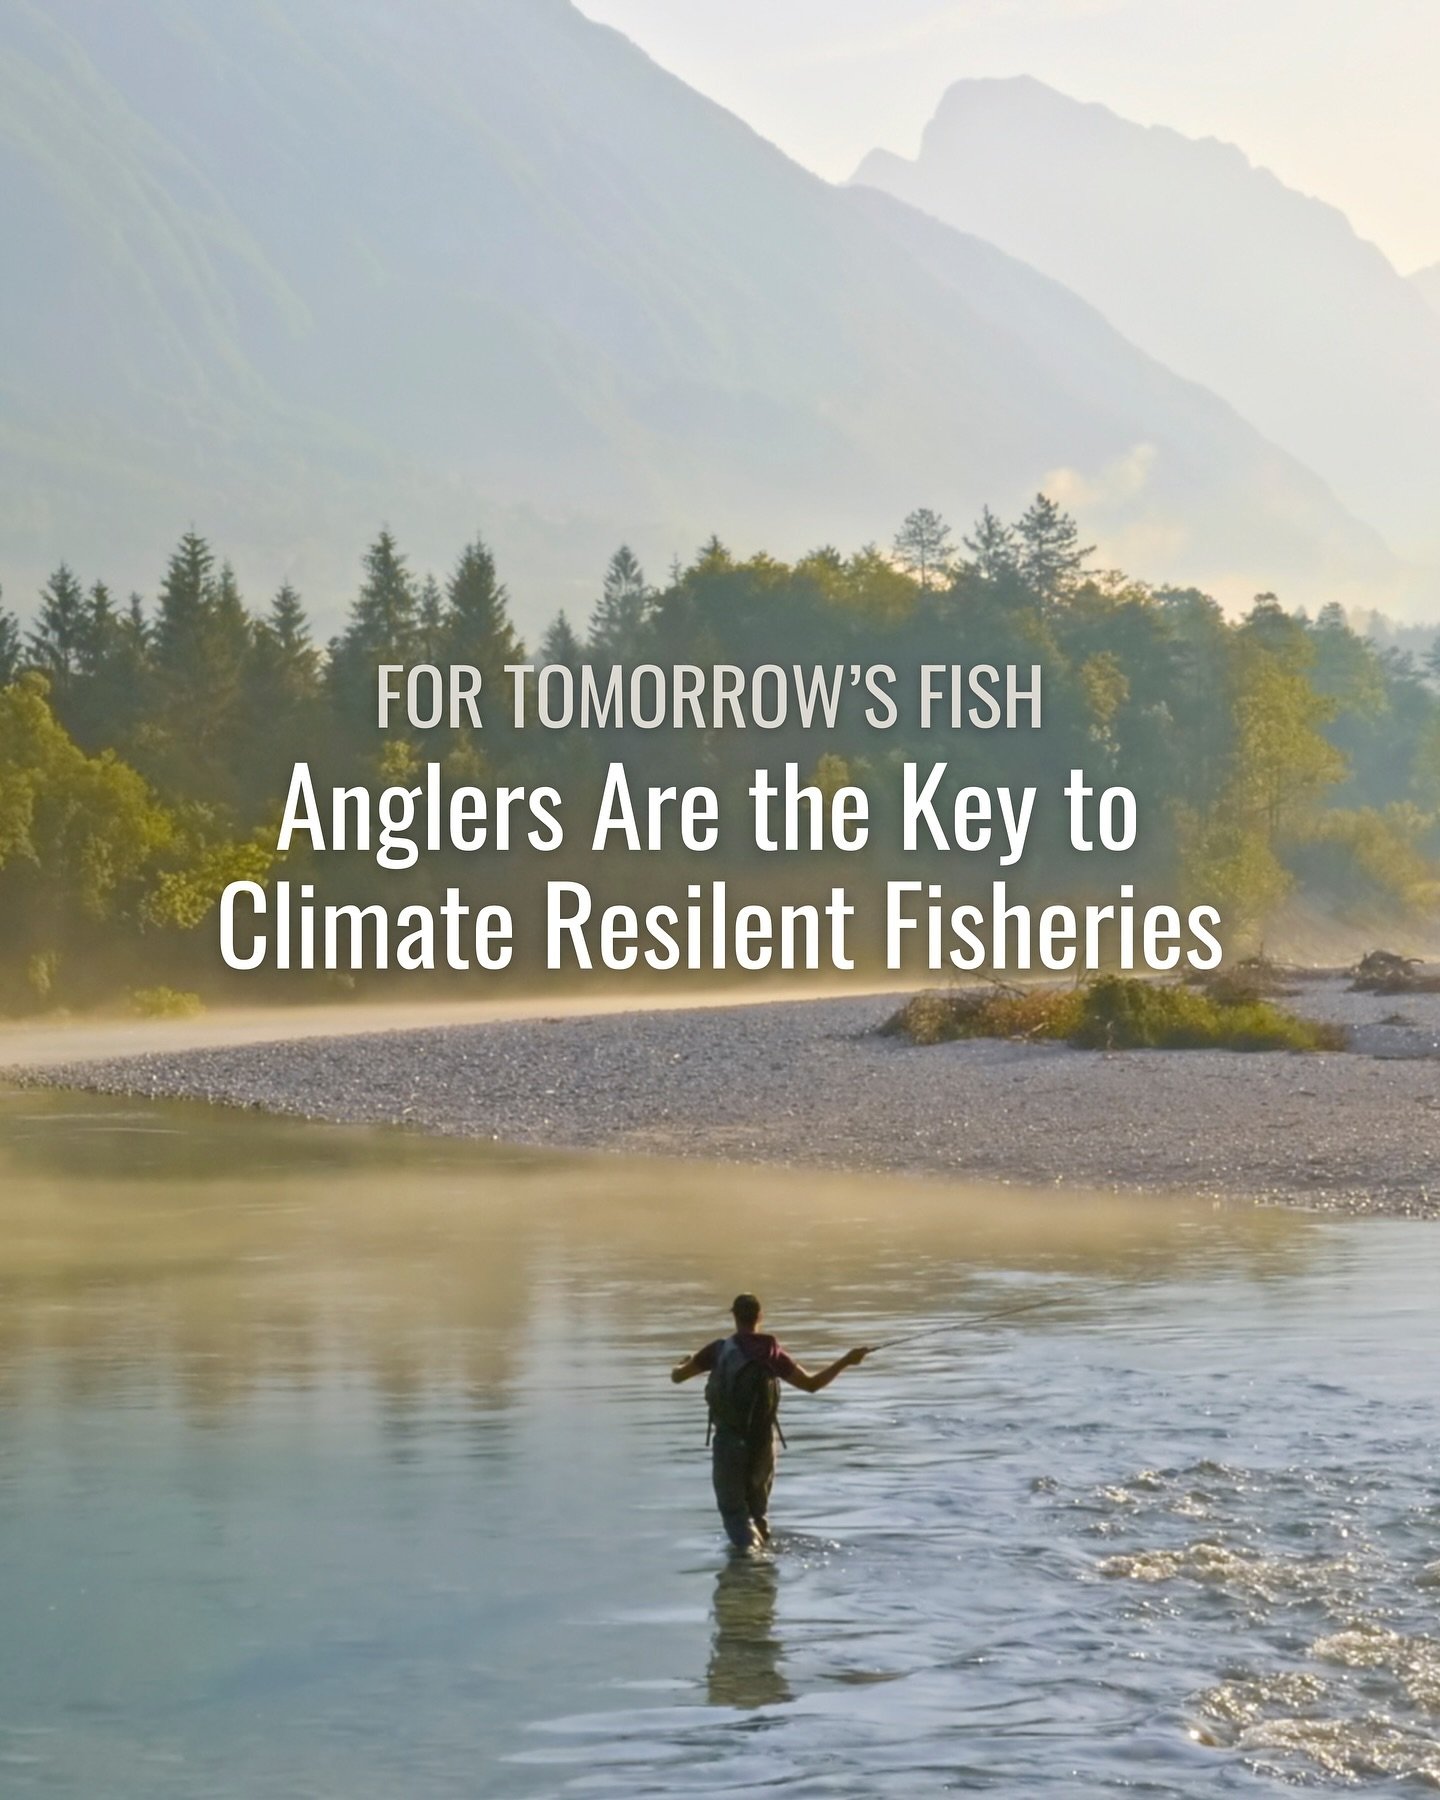 Climate change is affecting the places where anglers love to fish.

&ldquo;For Tomorrow&rsquo;s Fish&rdquo; is a call for a united front of anglers, industry, and other advocates to act now against the unparalleled threats of warming waters, deoxygen